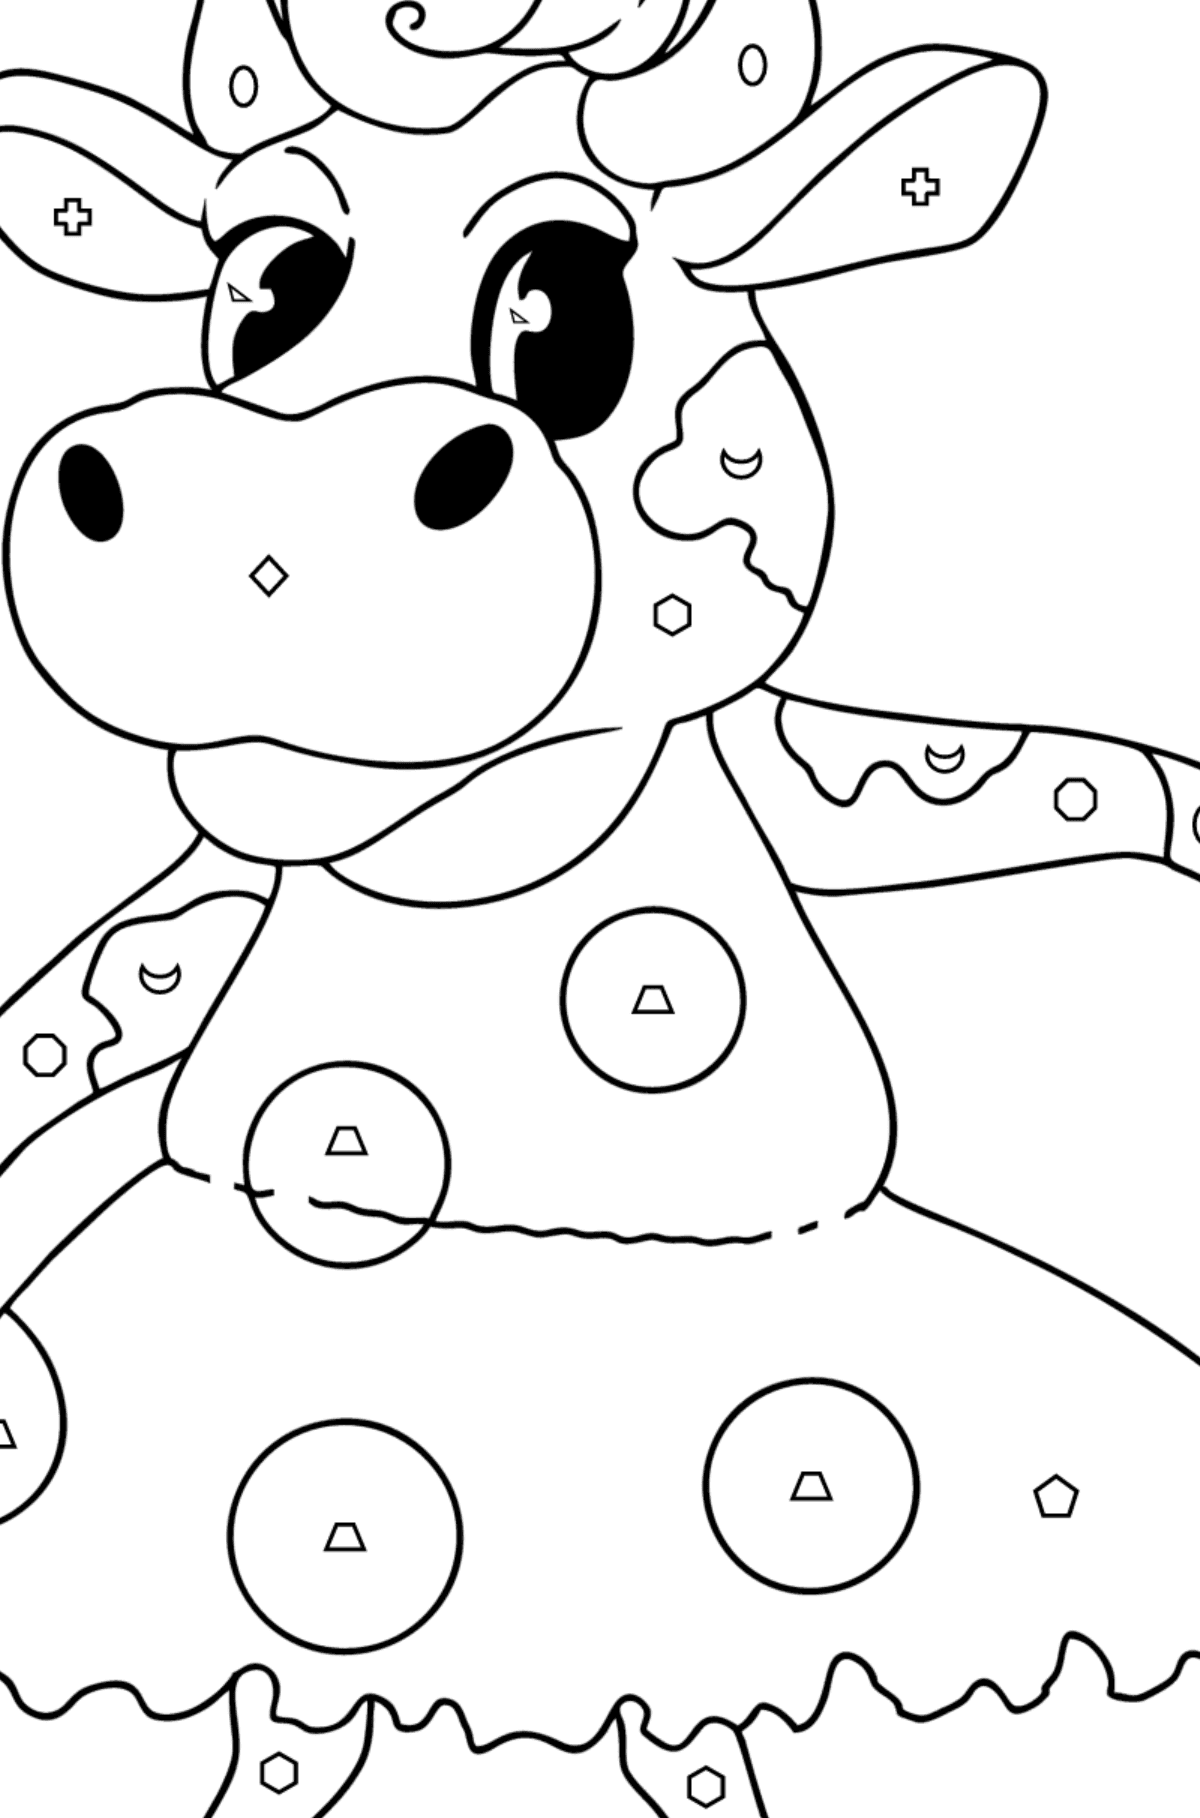 Kawaii cow standing up coloring page - Coloring by Geometric Shapes for Kids